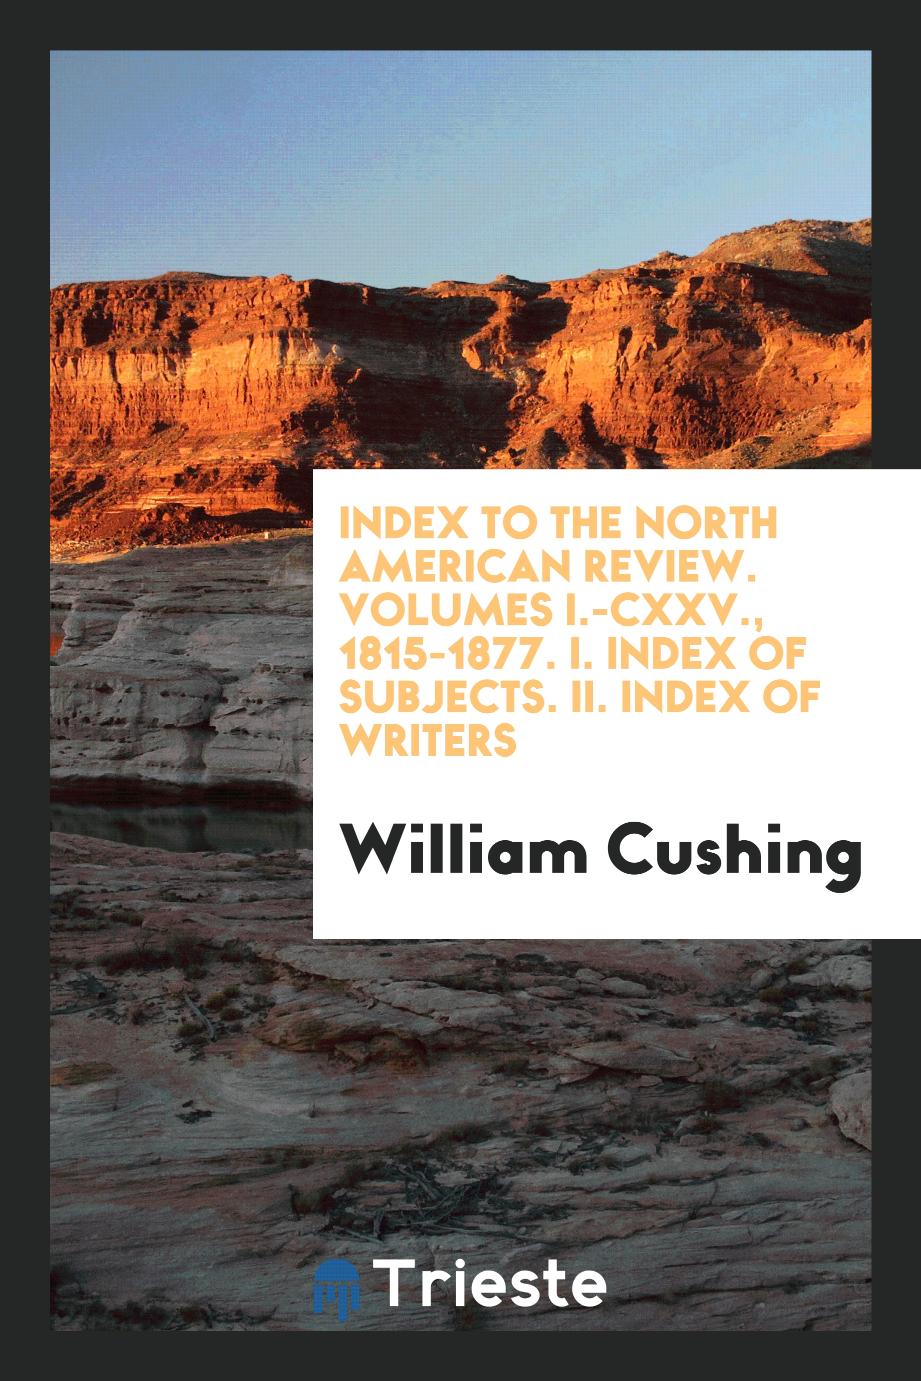 Index to the North American Review. Volumes I.-CXXV., 1815-1877. I. Index of Subjects. II. Index of Writers